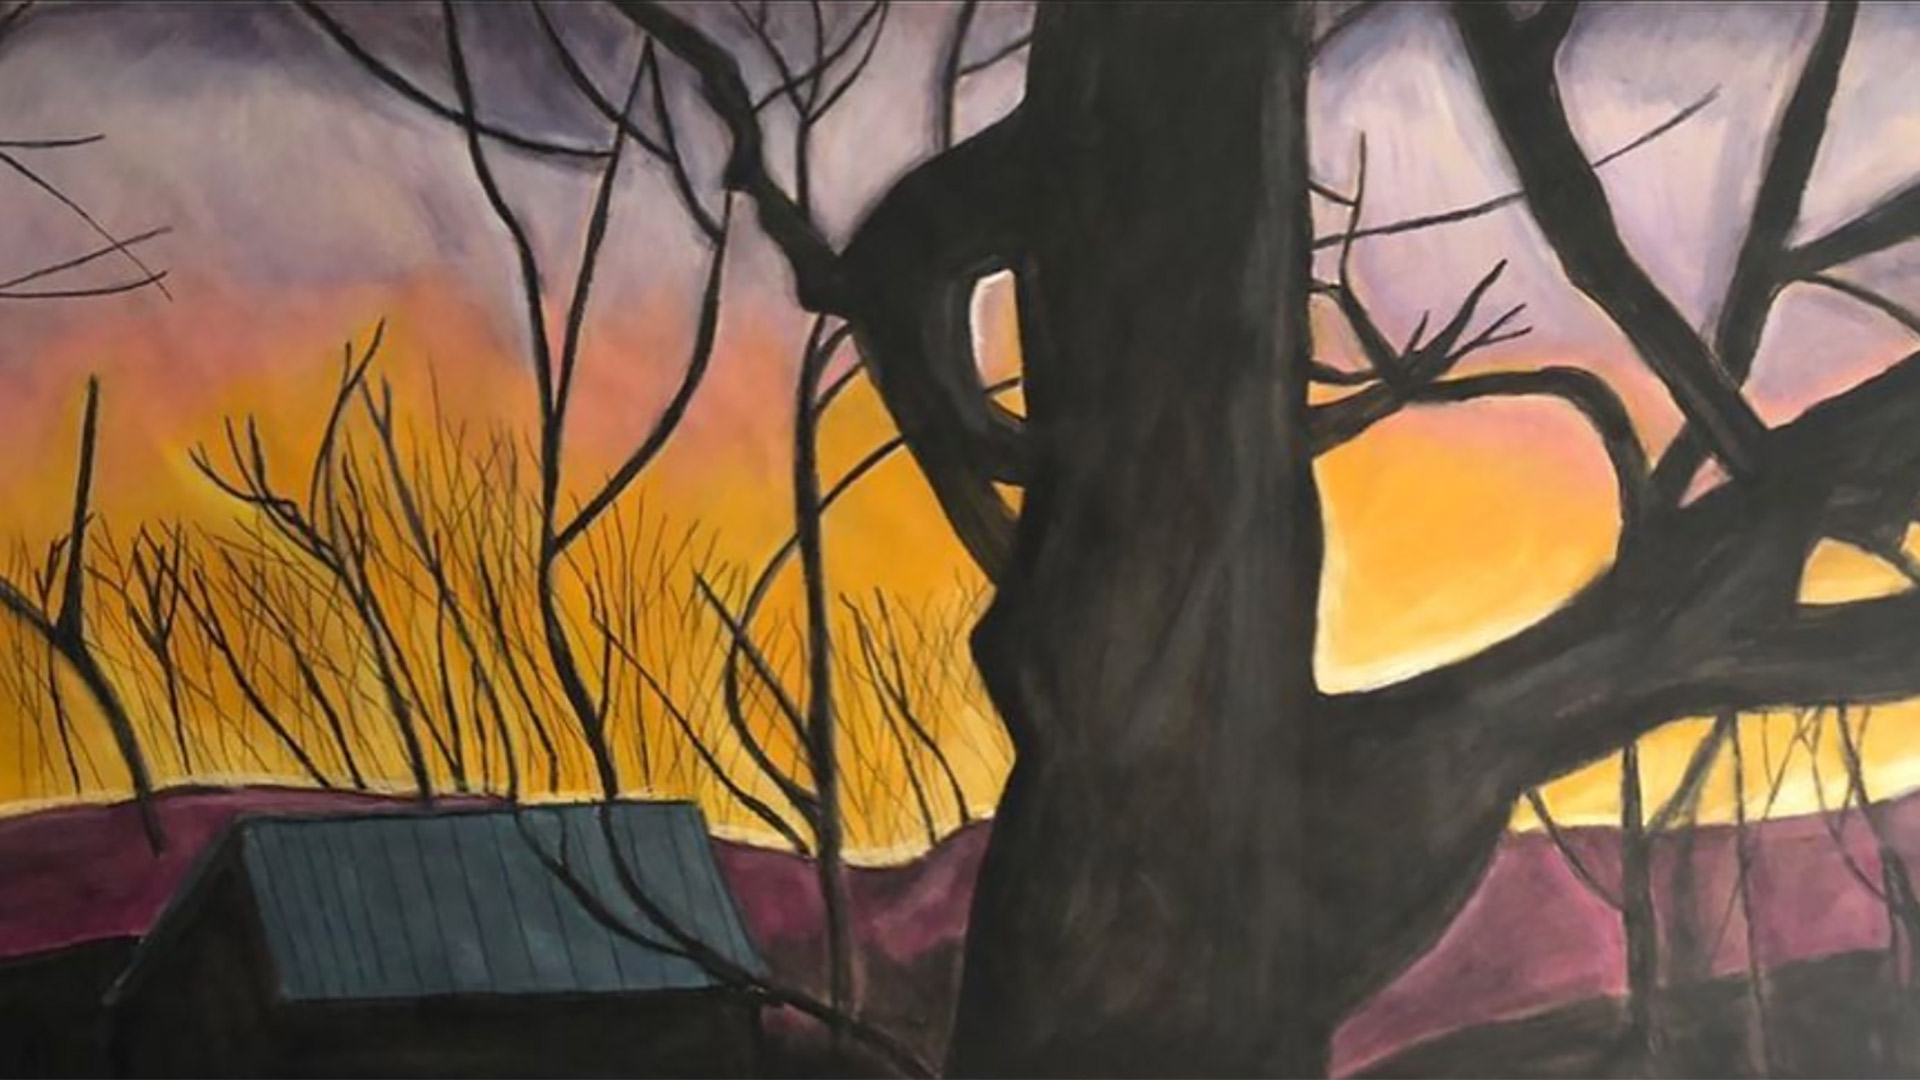 Painting of a sunset behind a large tree with spreading branches